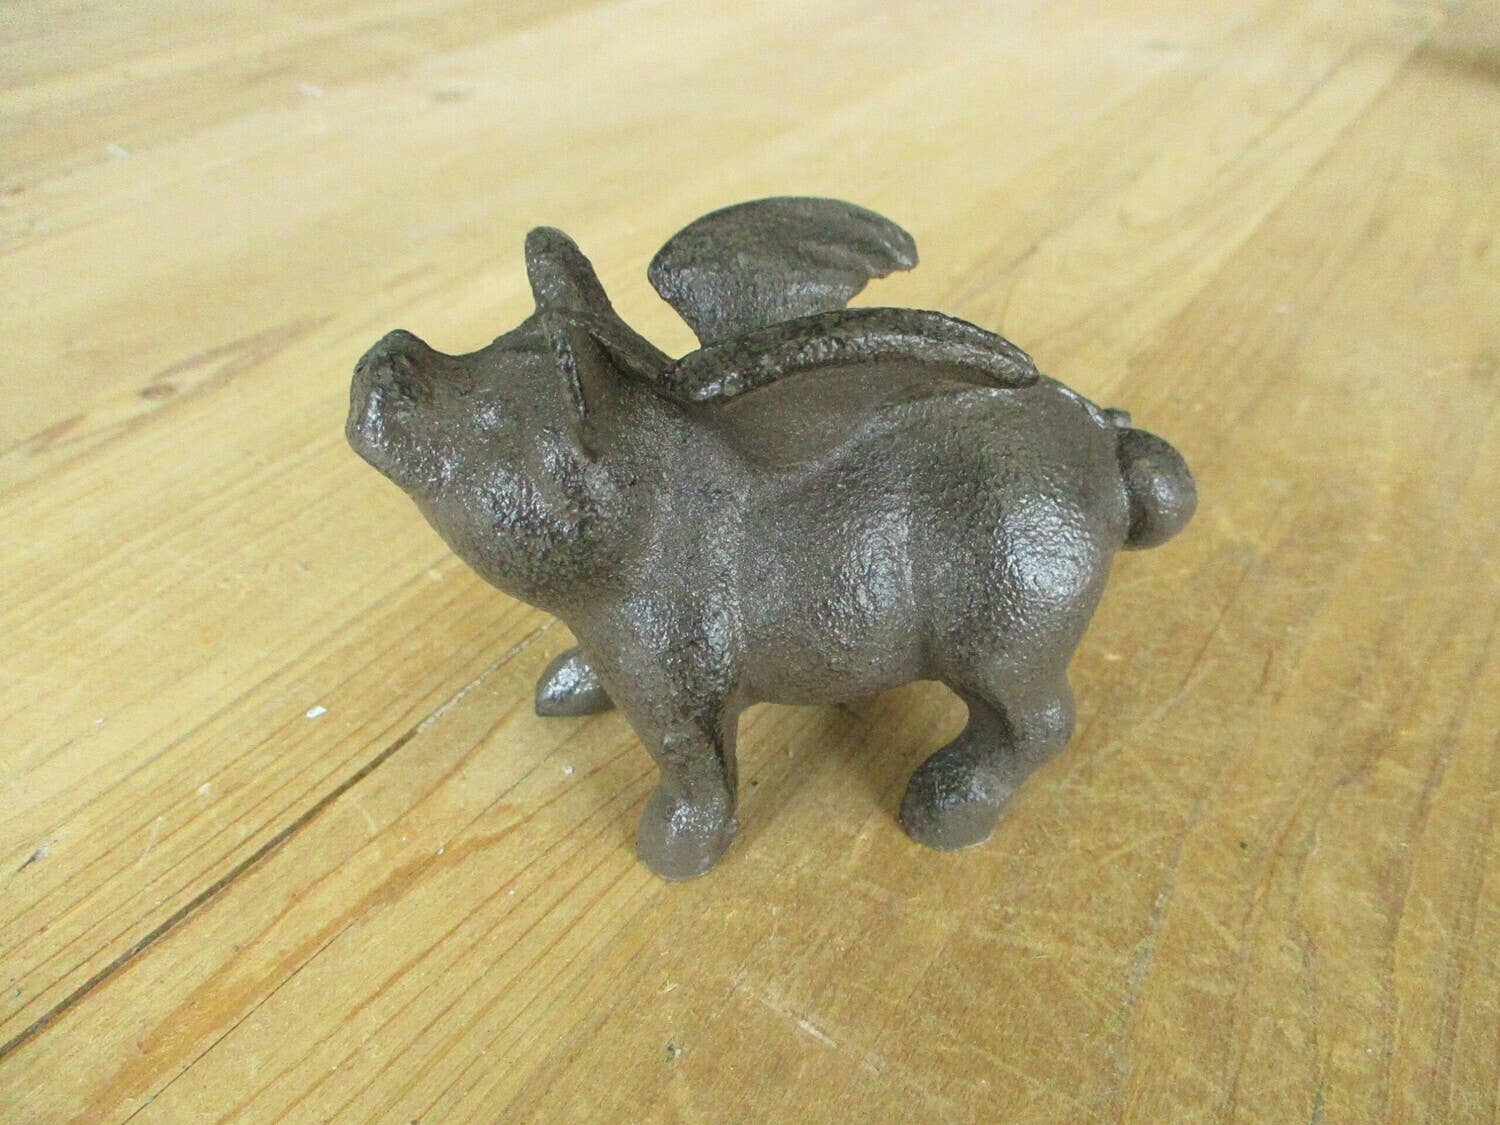 Flying Pig Cast Iron Decor: More Than Just a Paper Weight